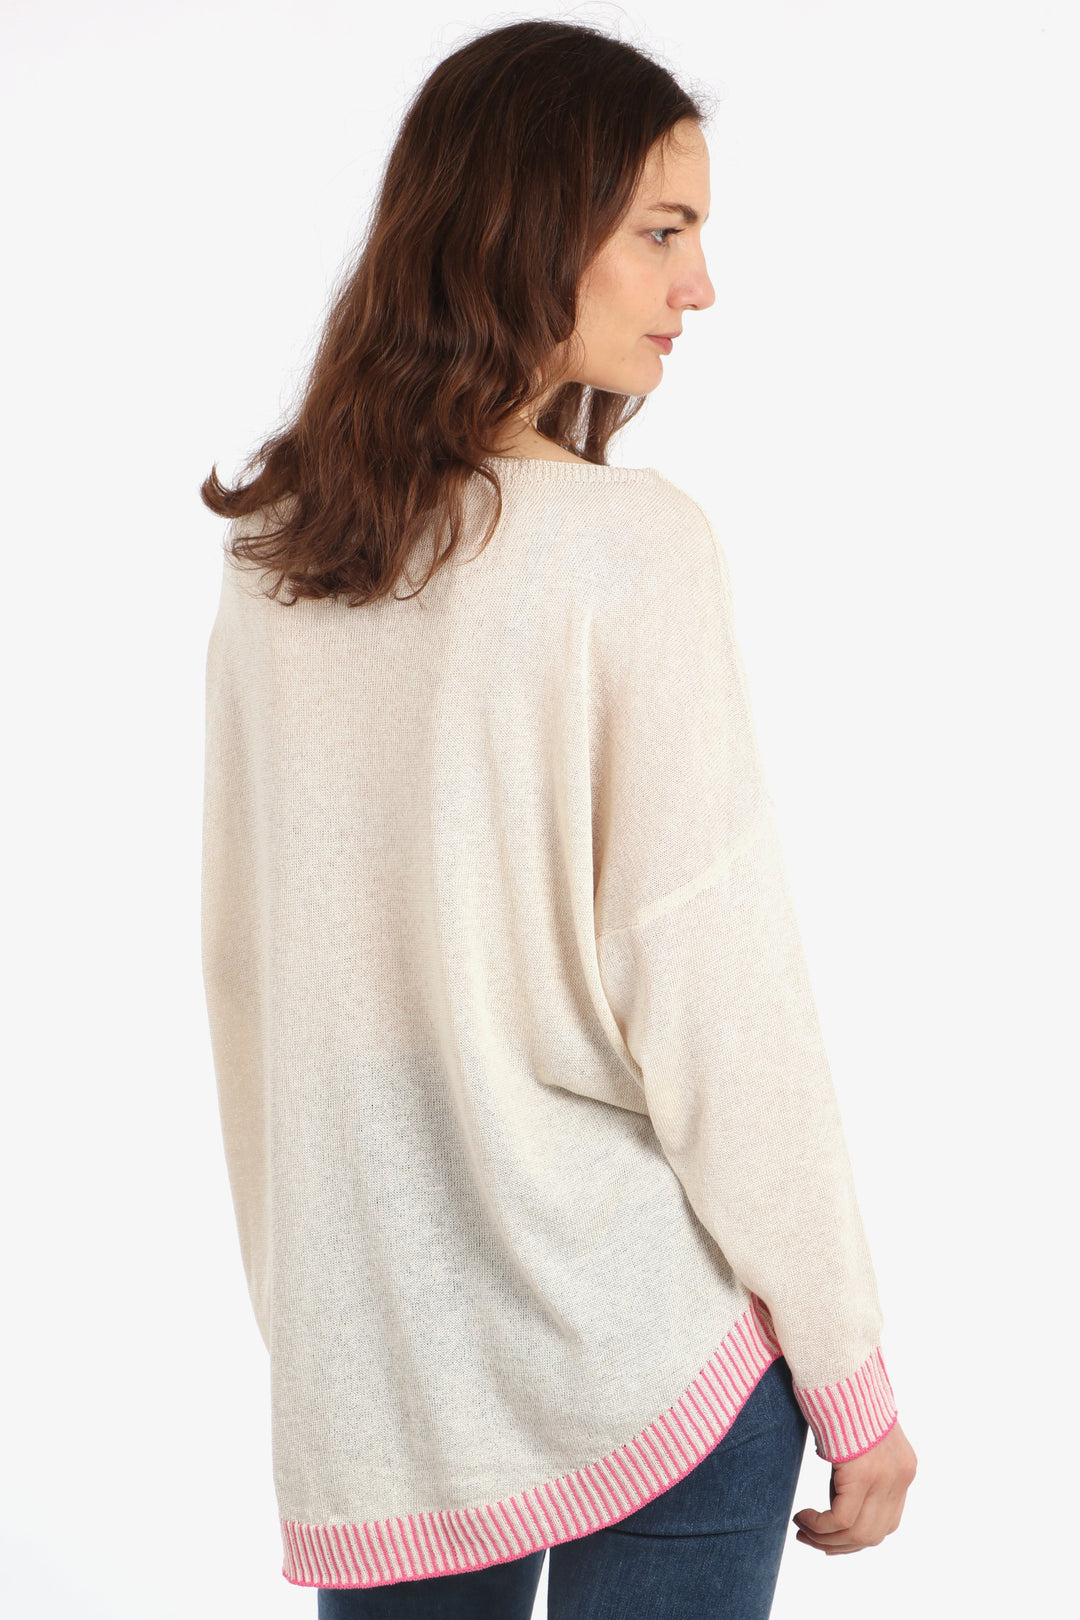 model showing the side of the jumper, showing the dip hem design where the jumper is longer at the back than the front